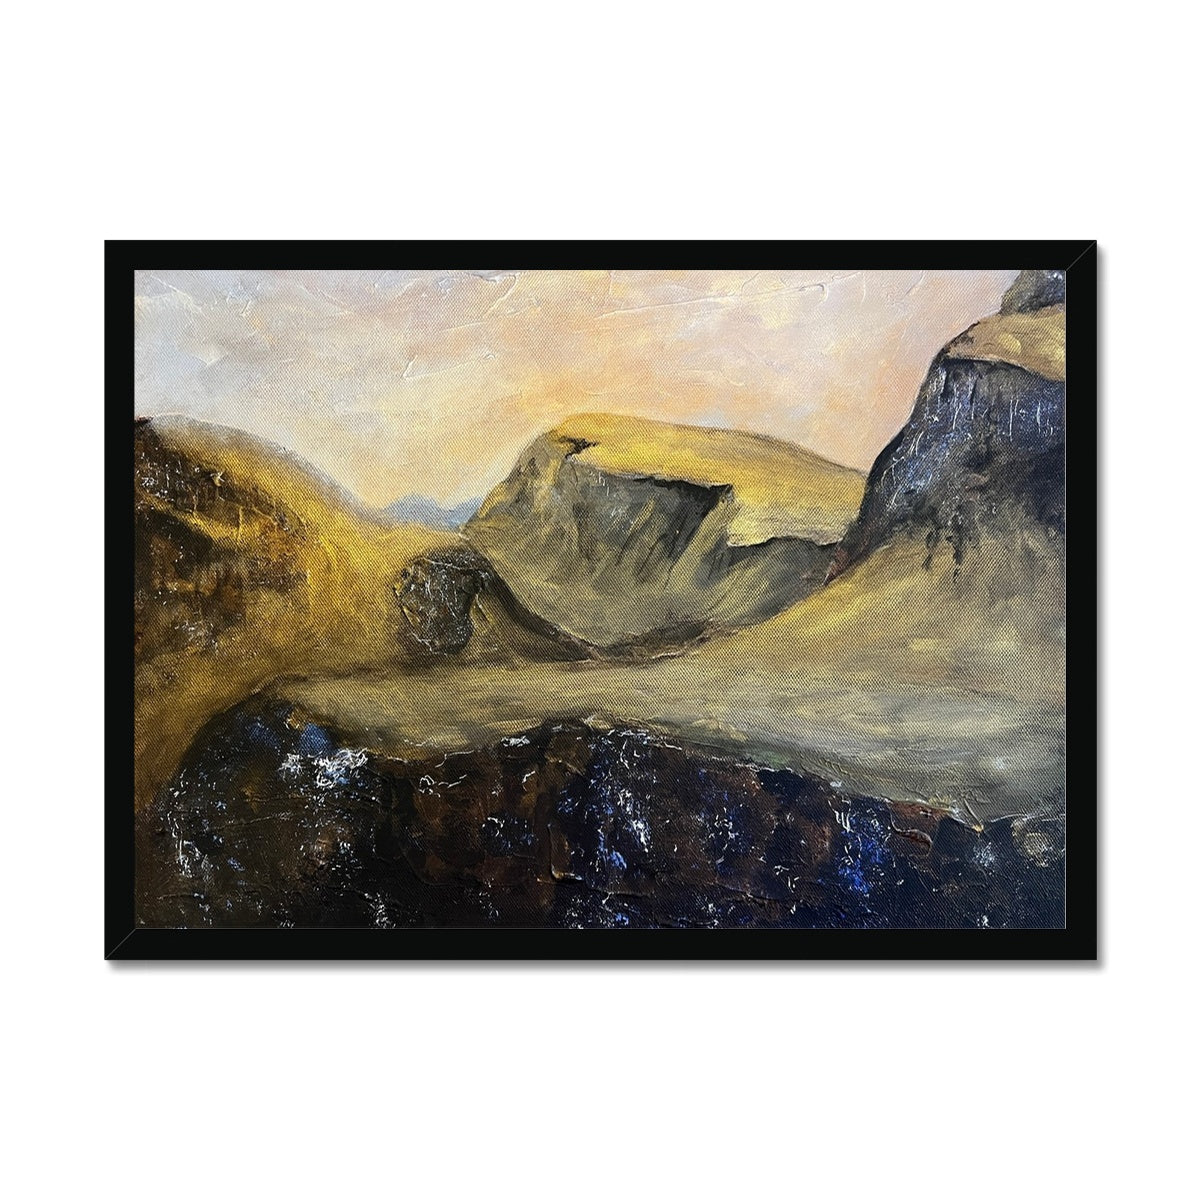 The Quiraing Skye Painting | Framed Prints From Scotland-Framed Prints-Skye Art Gallery-A2 Landscape-Black Frame-Paintings, Prints, Homeware, Art Gifts From Scotland By Scottish Artist Kevin Hunter